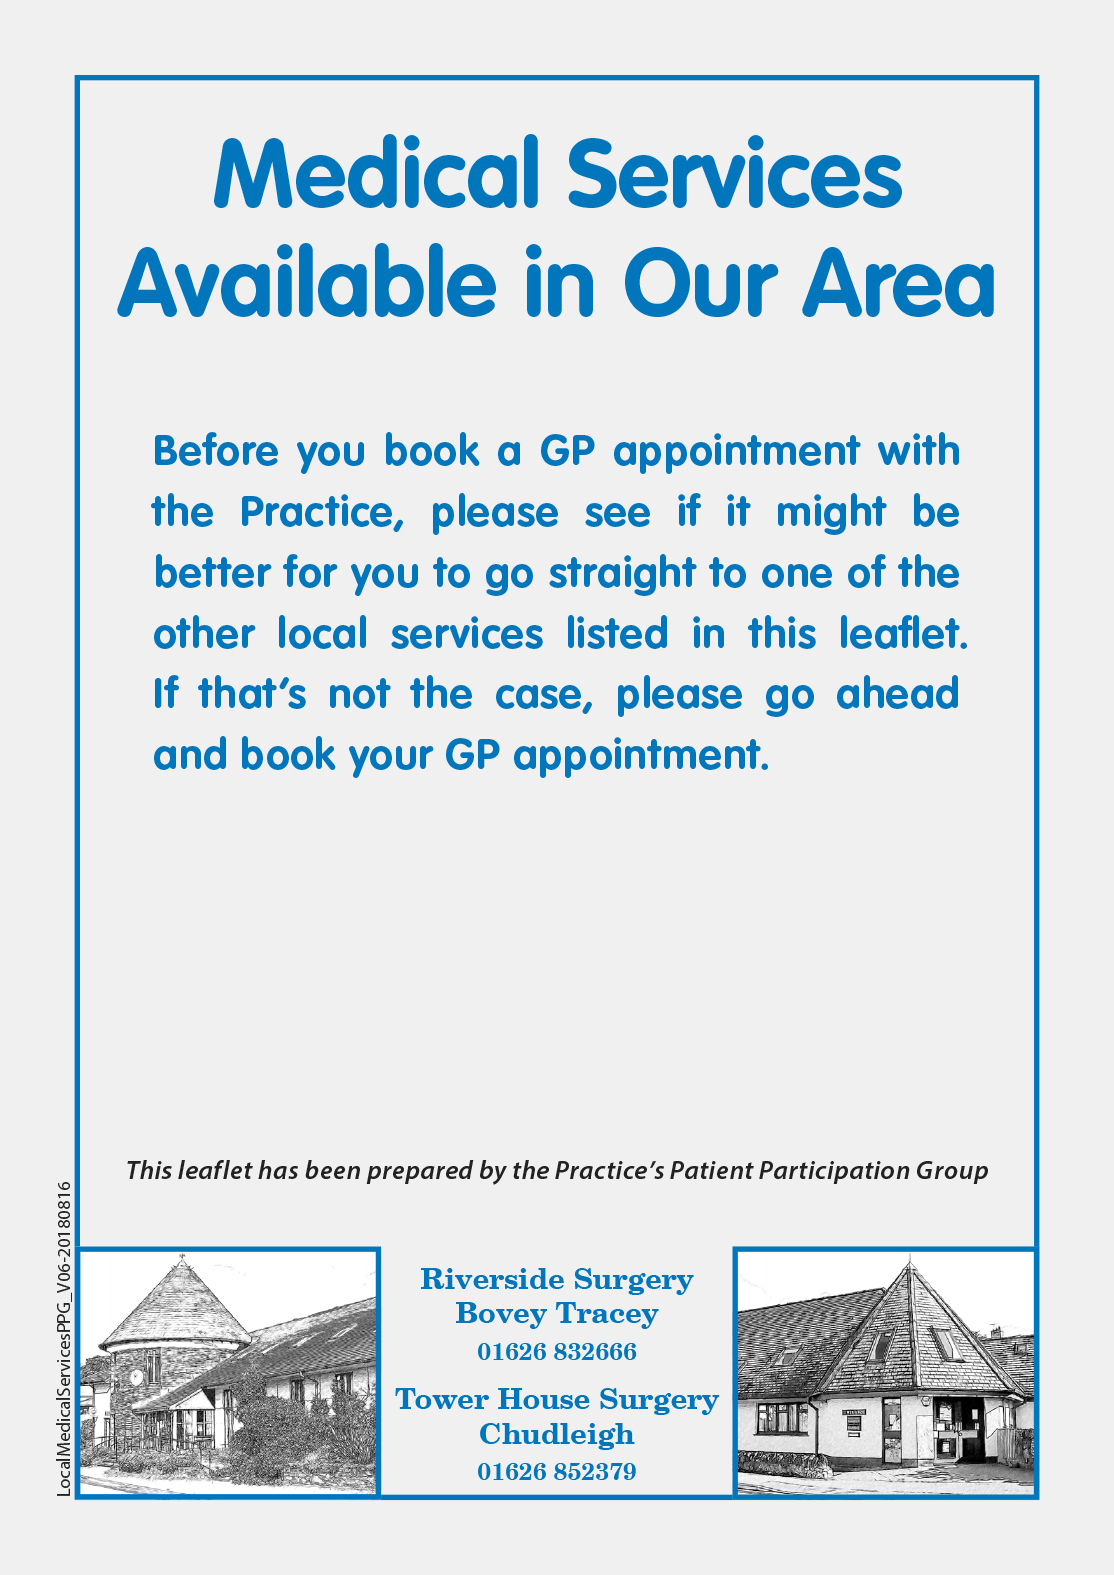 Click here for the Medical Services Available in Our Area Leaflet